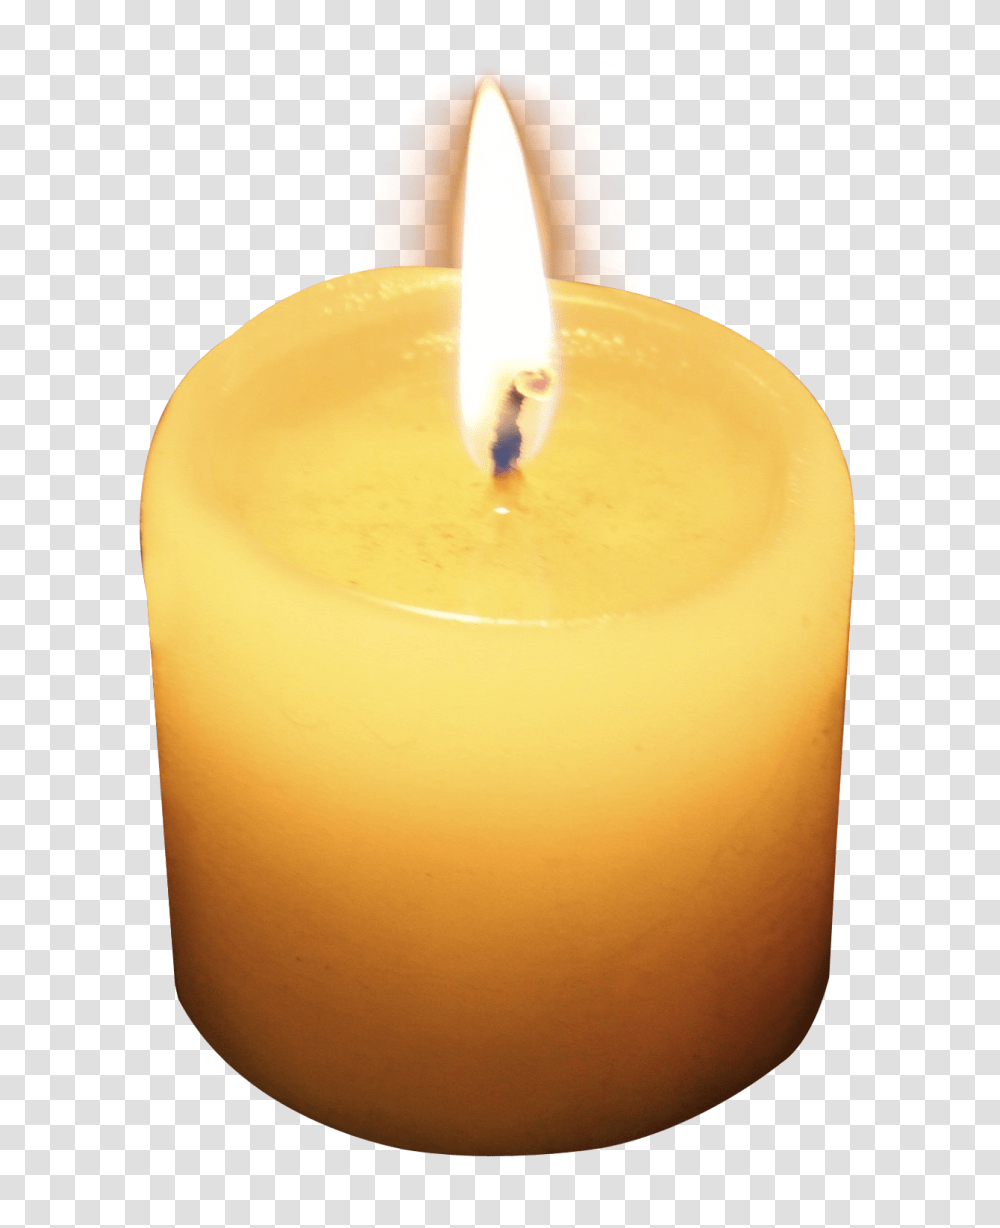 Candle Image, Religion, Fire, Lamp, Flame Transparent Png